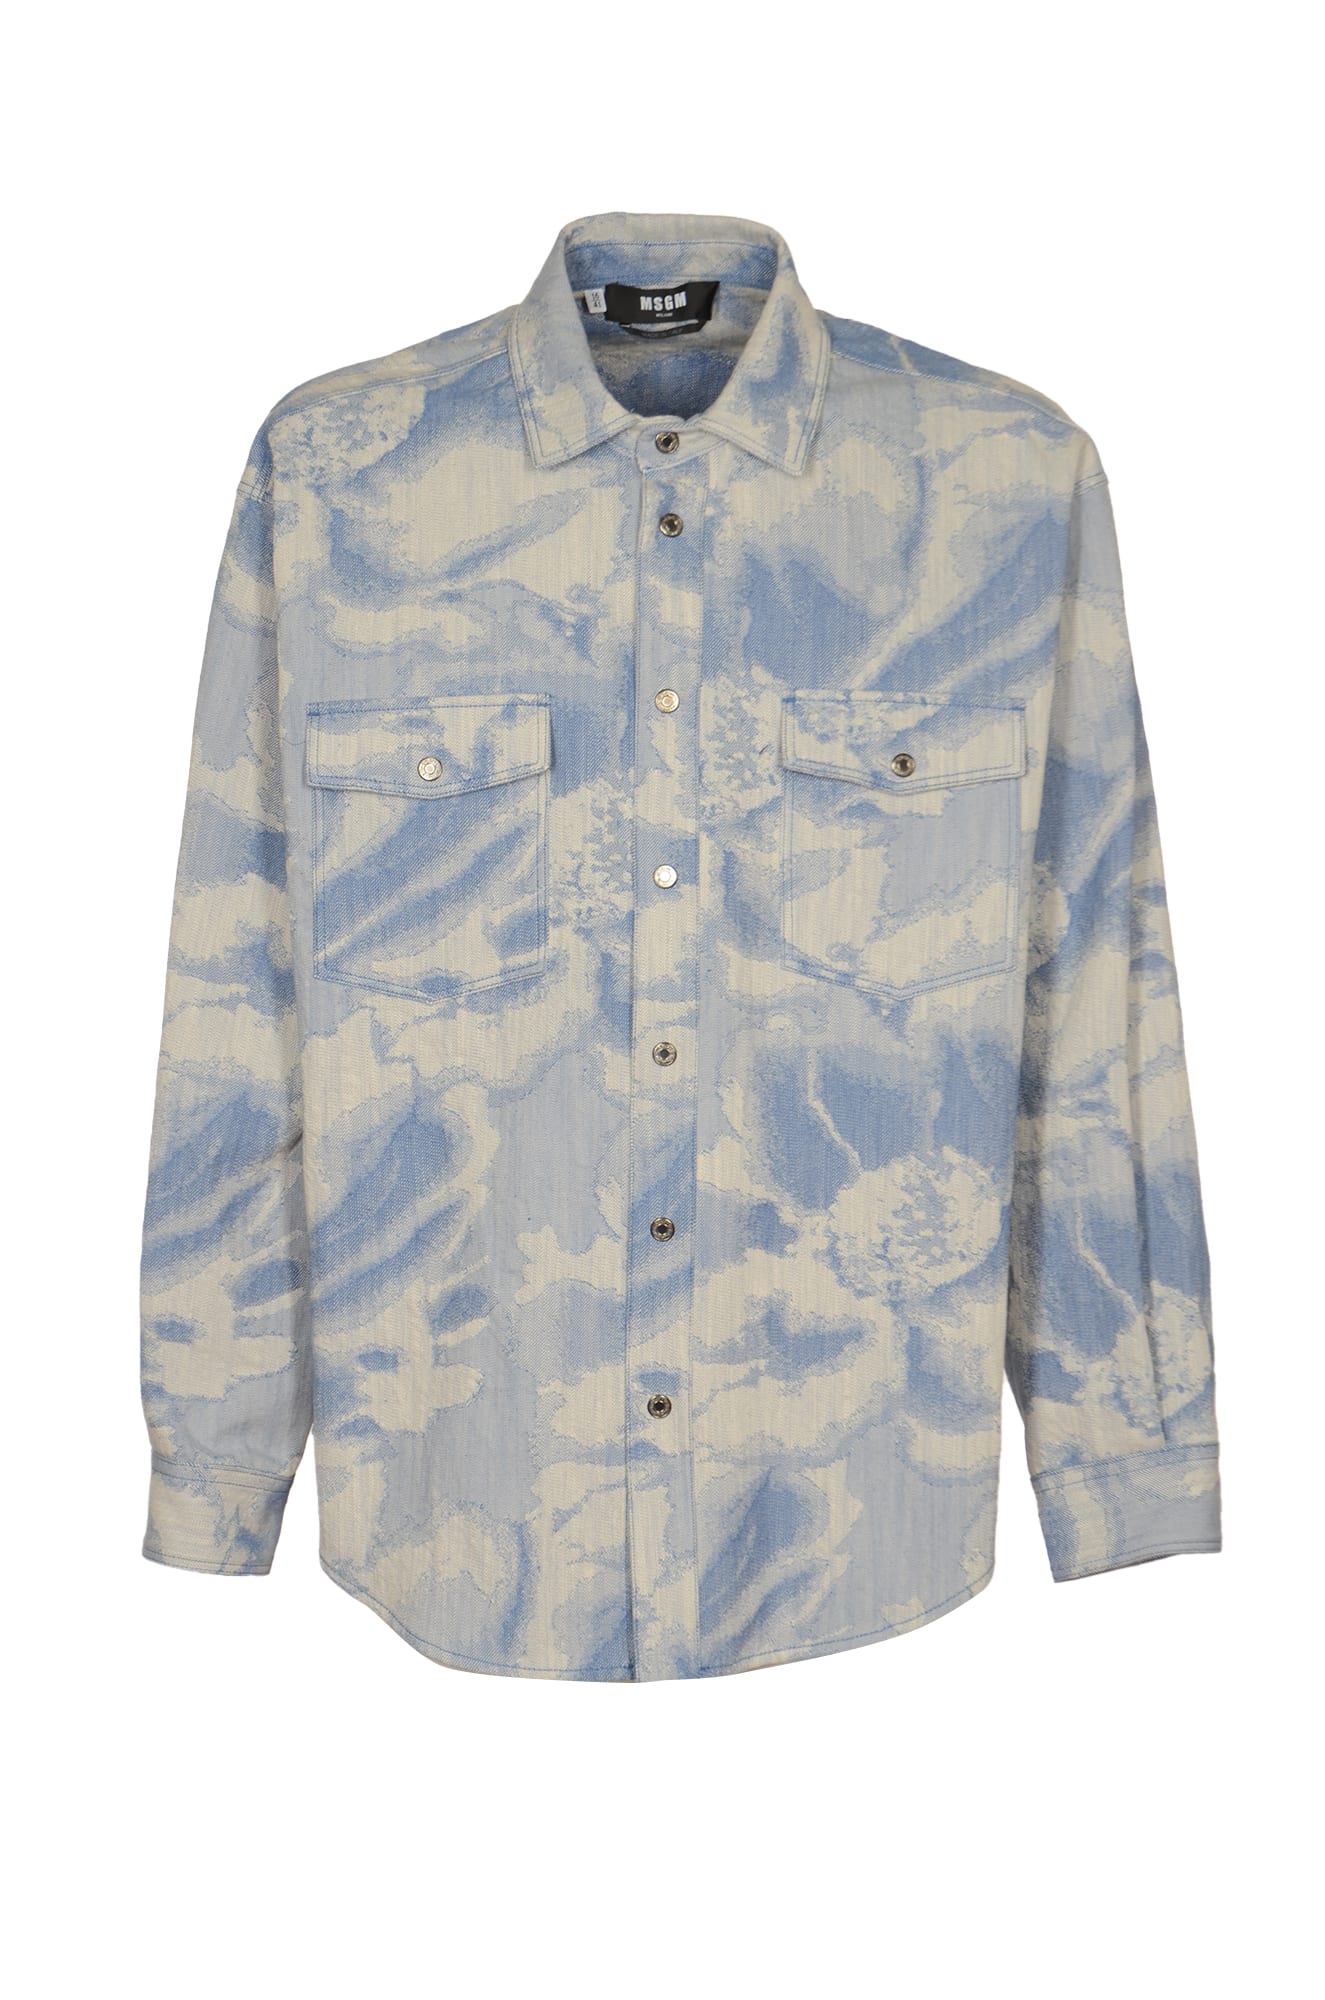 Msgm Floral Print Round Neck Shirt In Light Blue